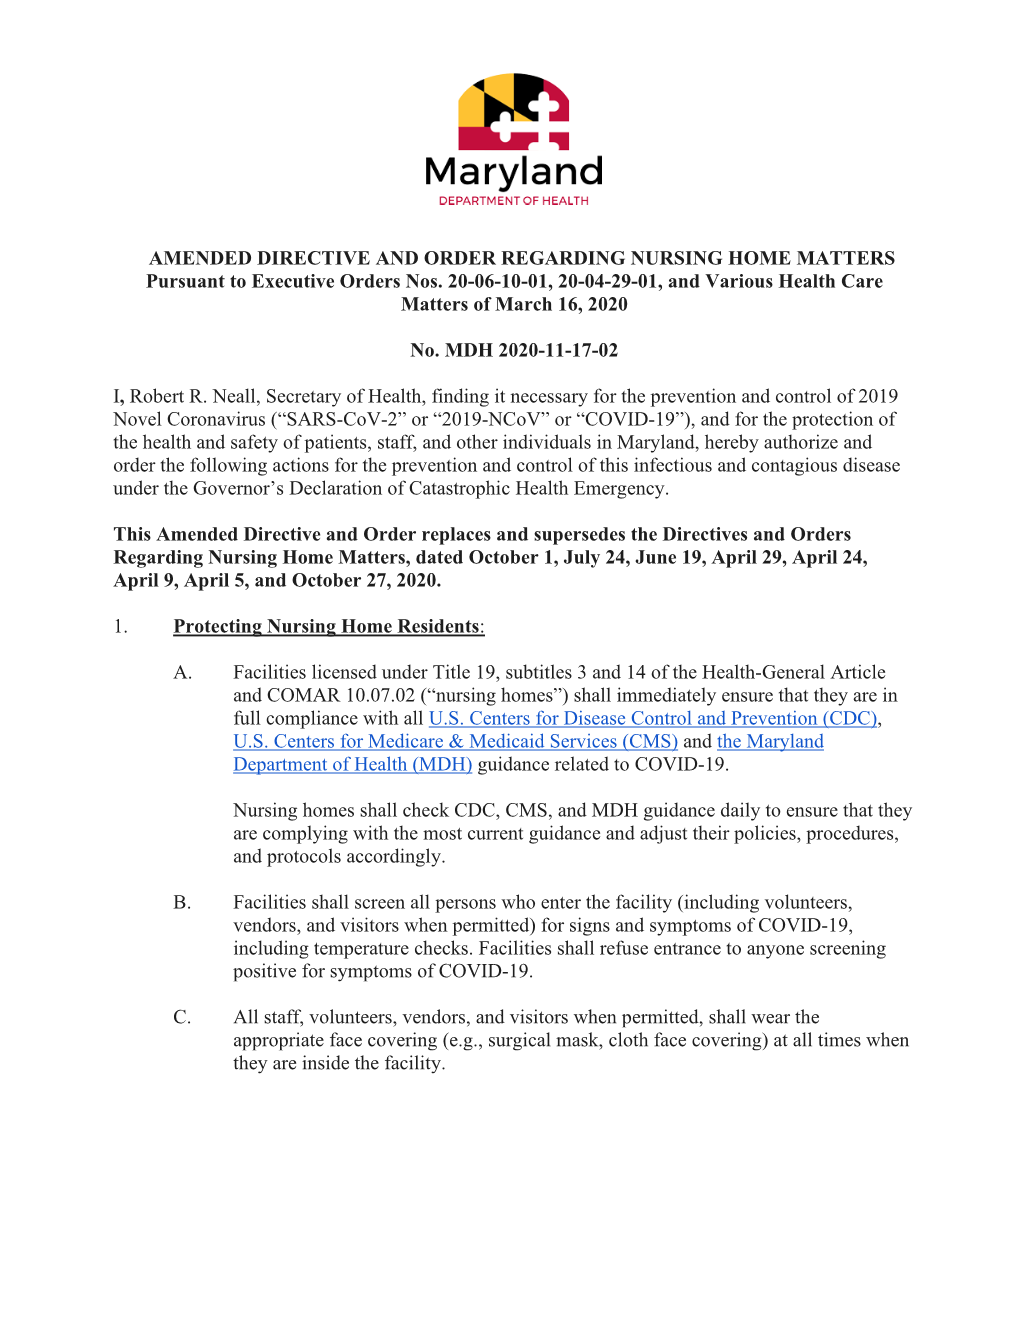 MDH Amended Directive and Order Regarding Nursing Home Matters